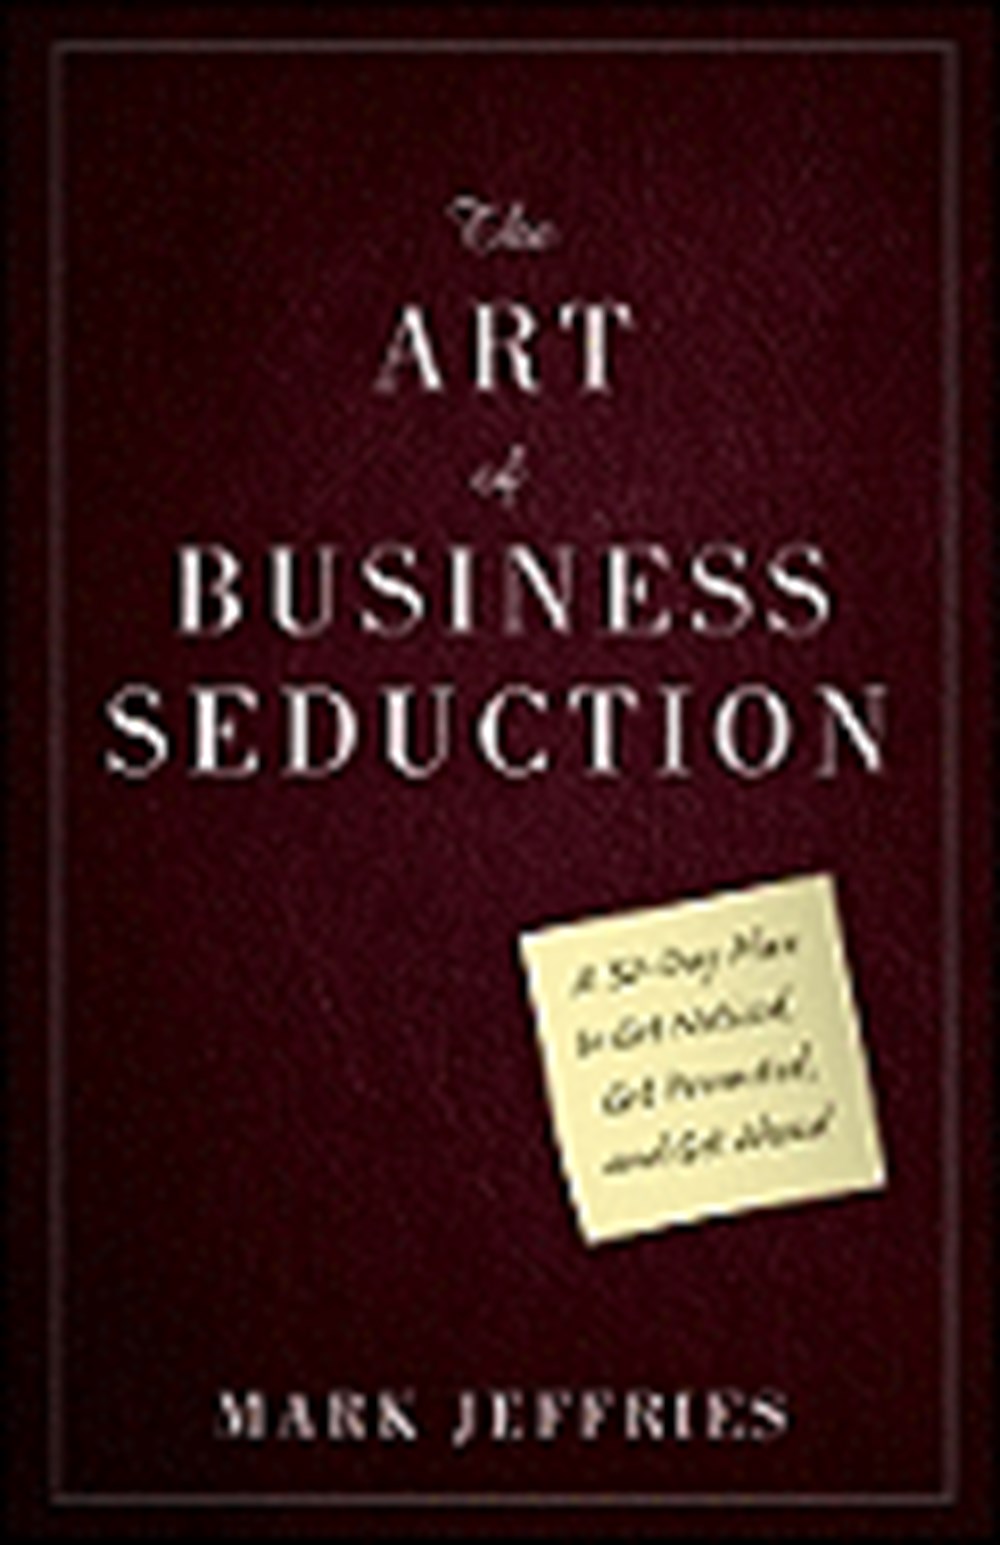 Art of Business Seduction: A 30-Day Plan to Get Noticed, Get Promoted, and Get Ahead